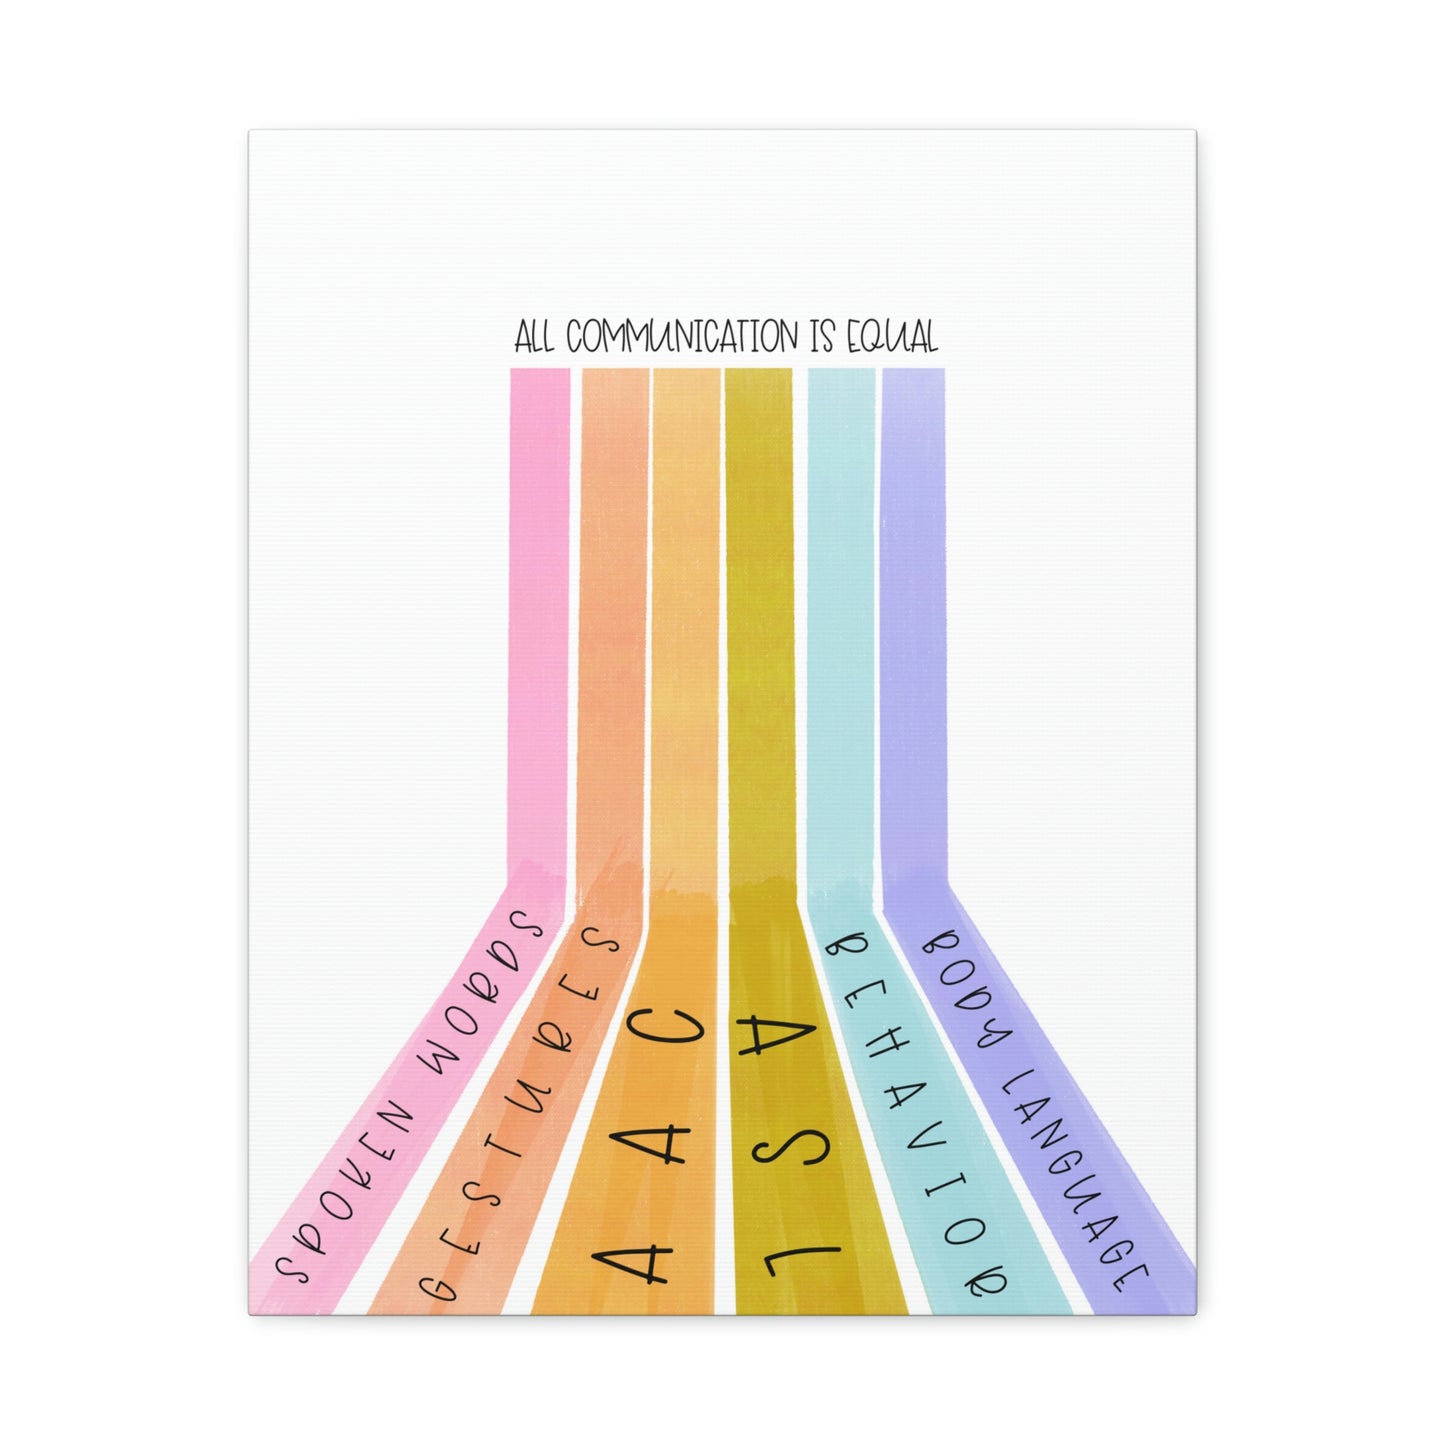 All Communication is Equal Canvas Print (16 x 20 in)